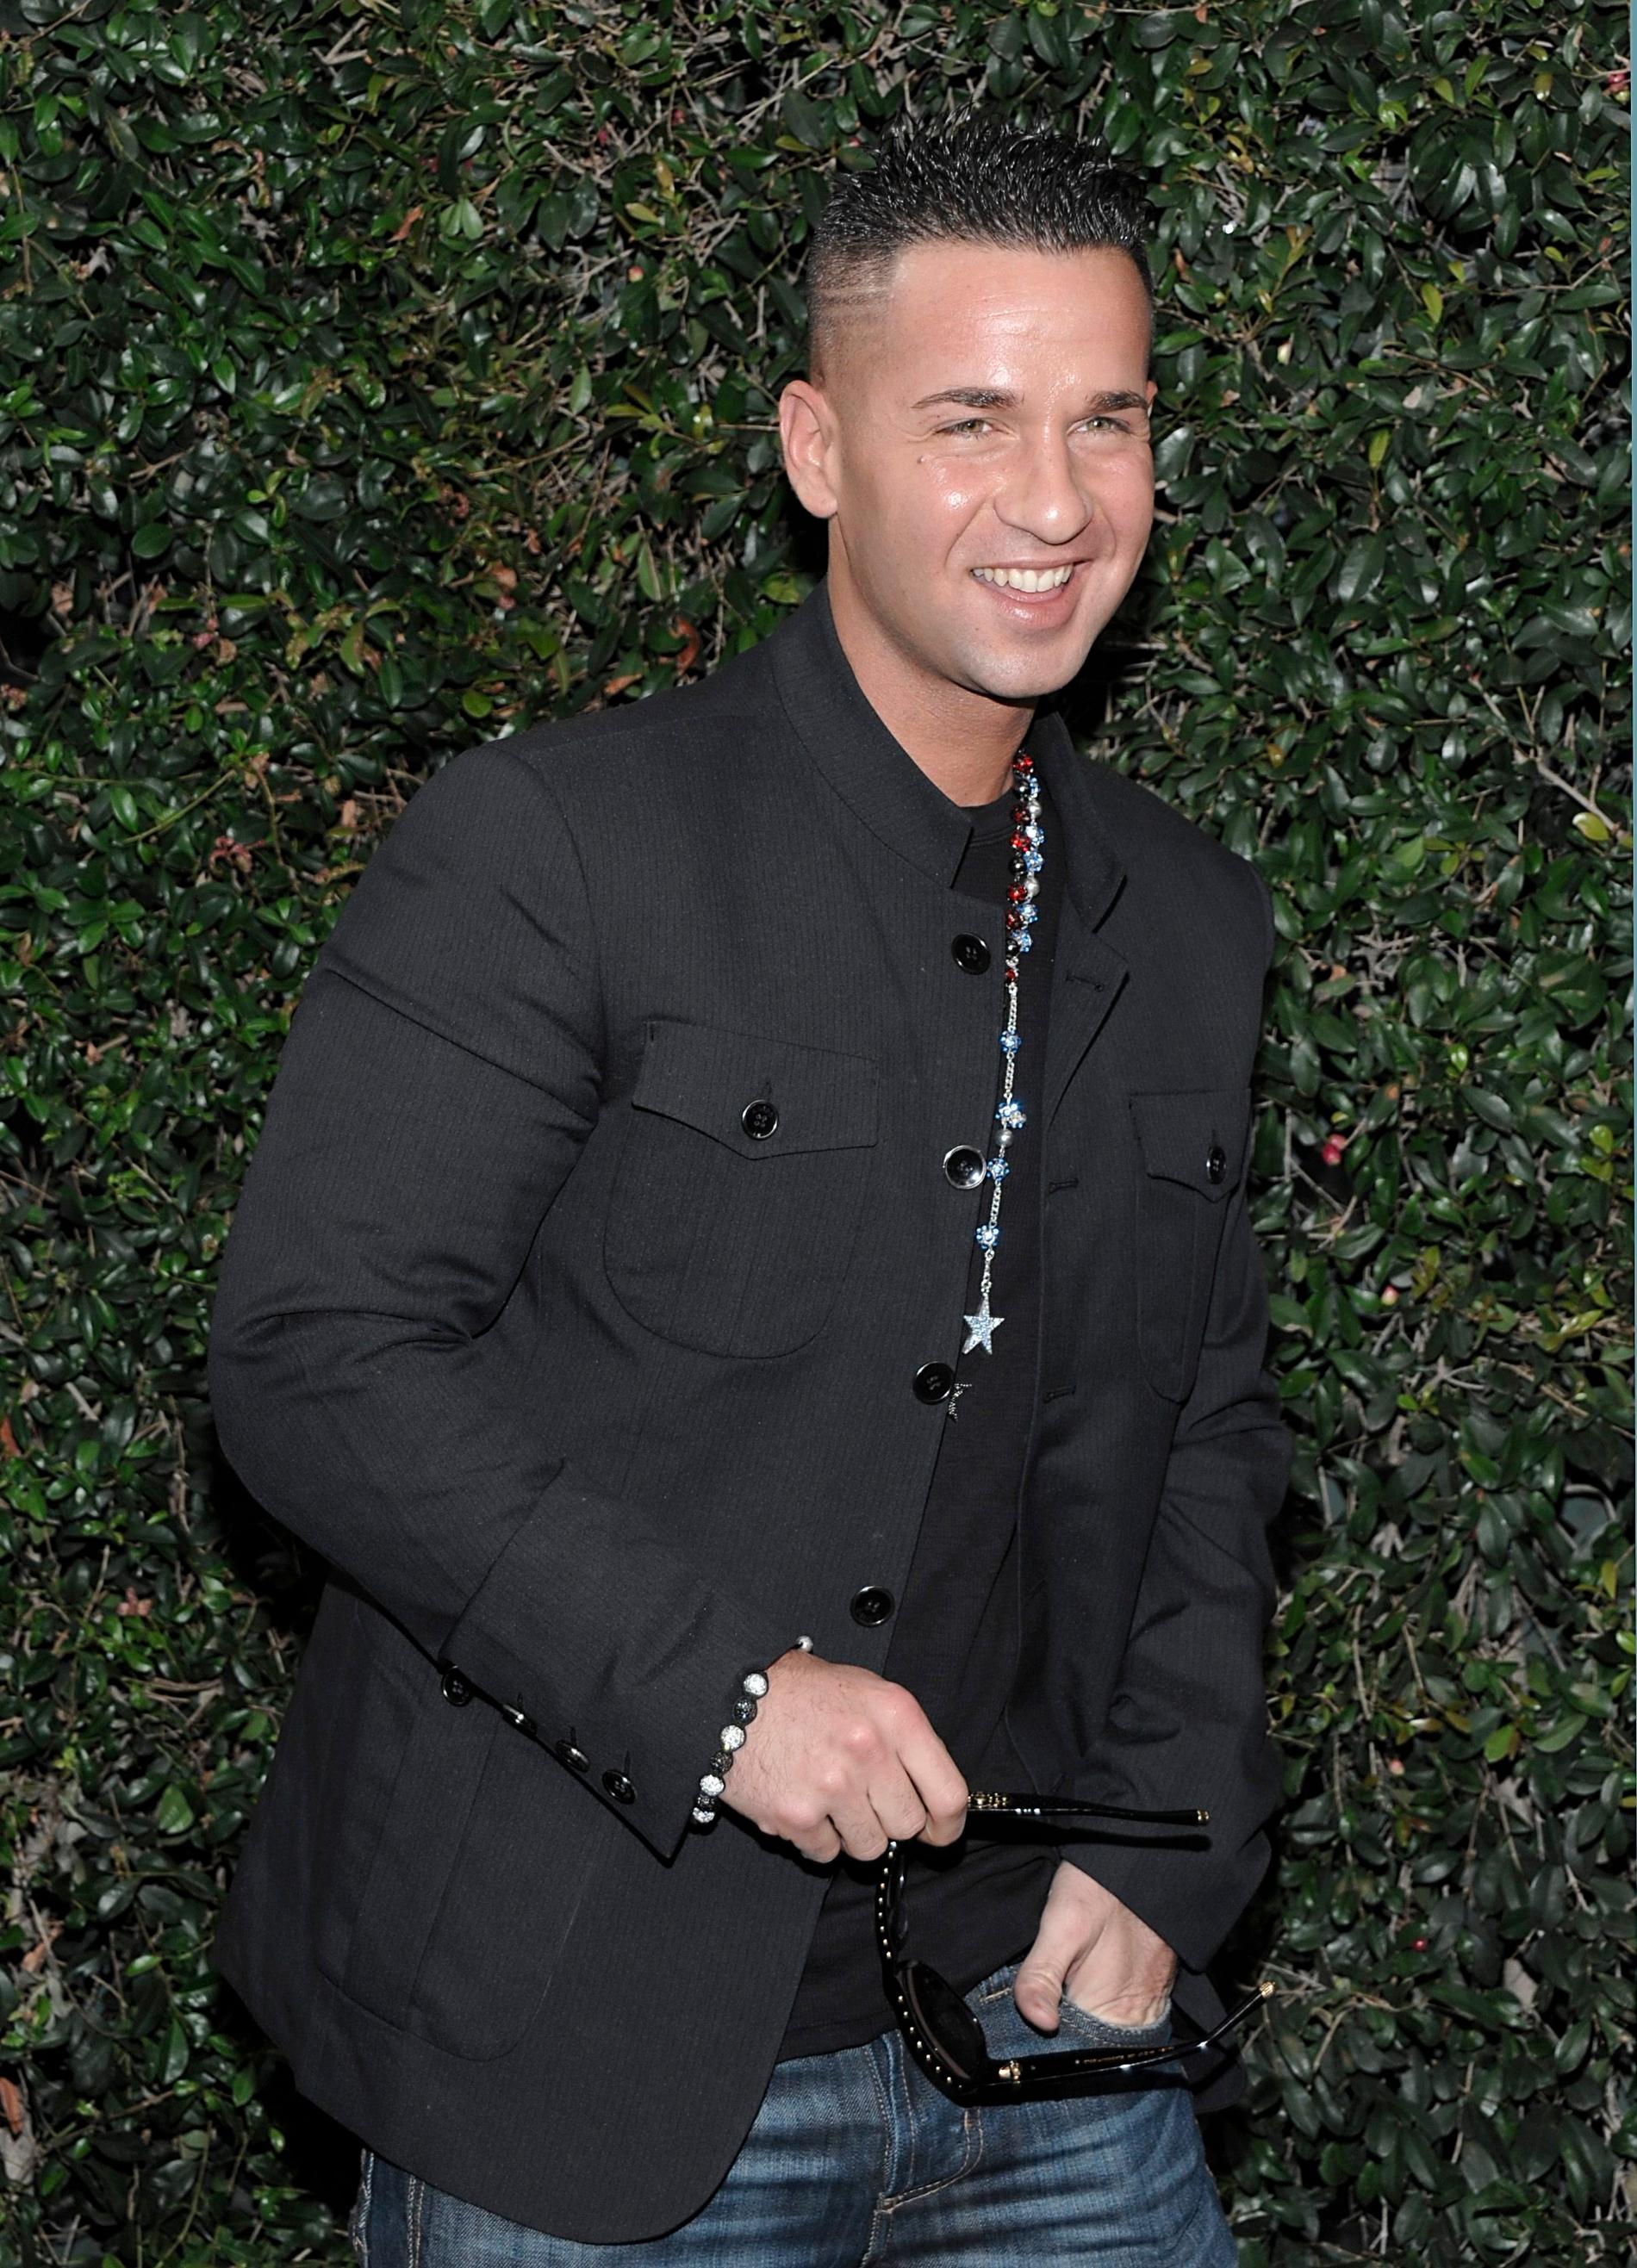 Mike ”The situation” Sorrentino.